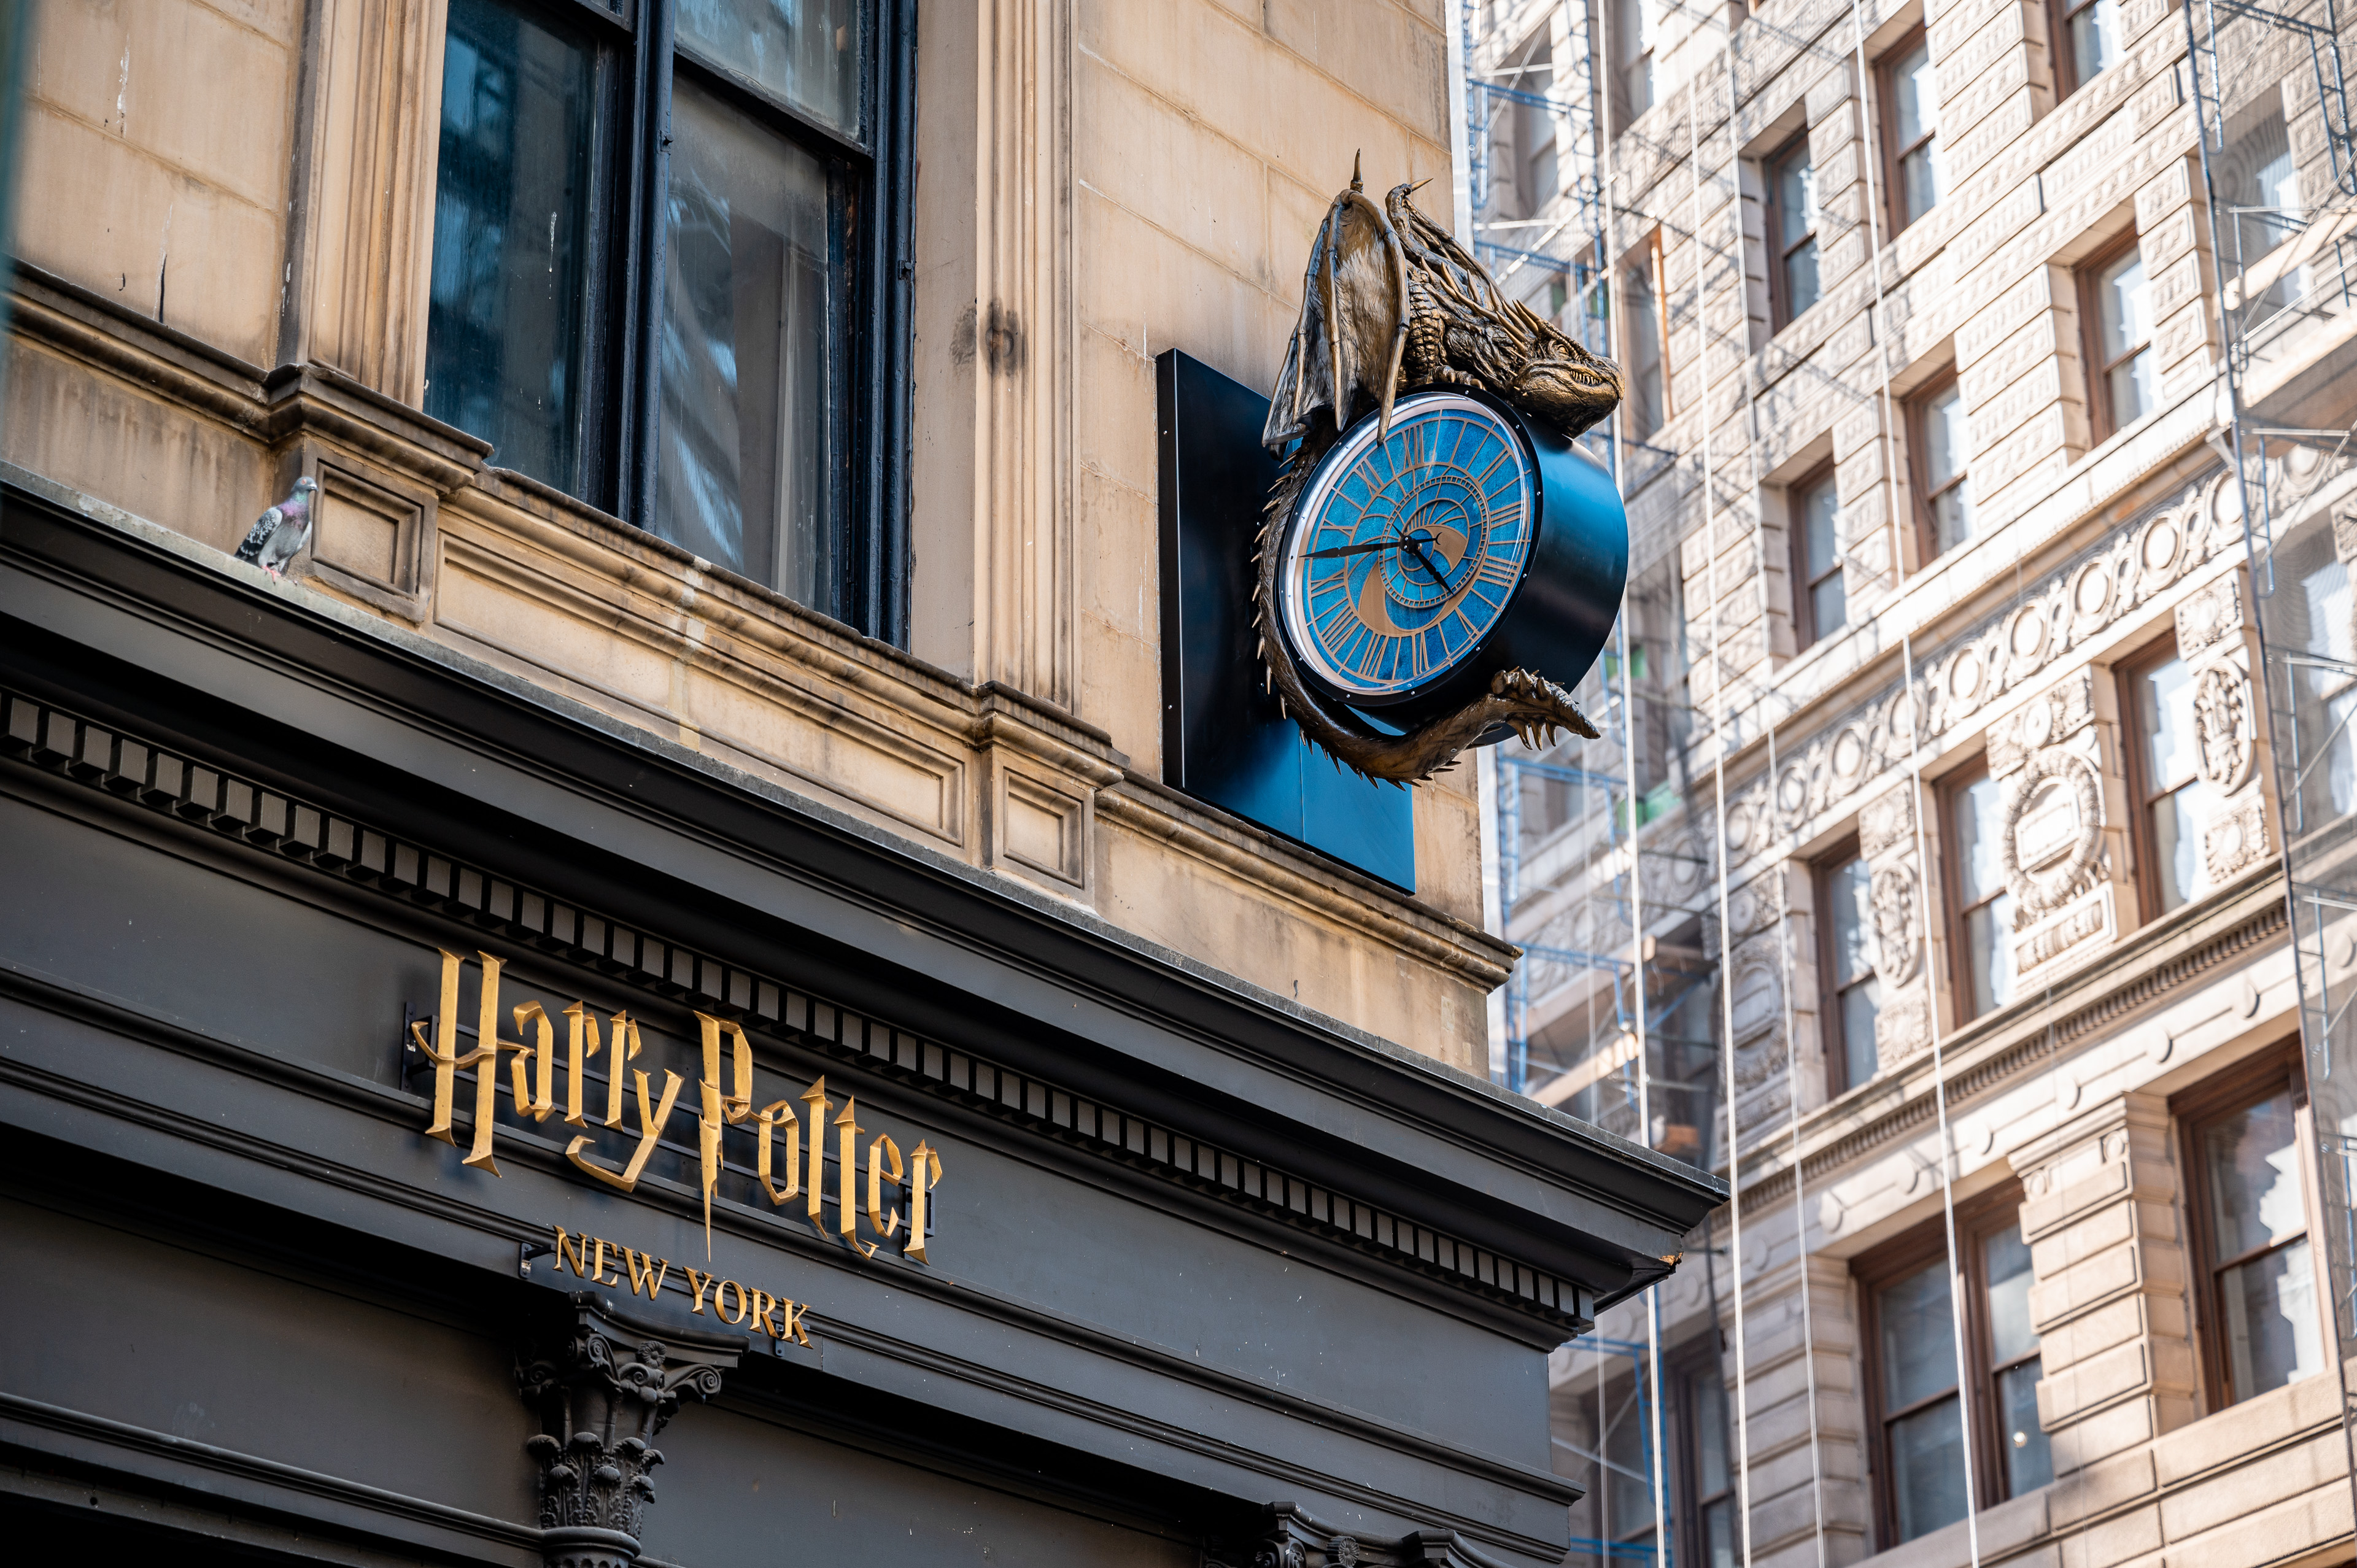 Shopping in The Wizarding World of Harry Potter